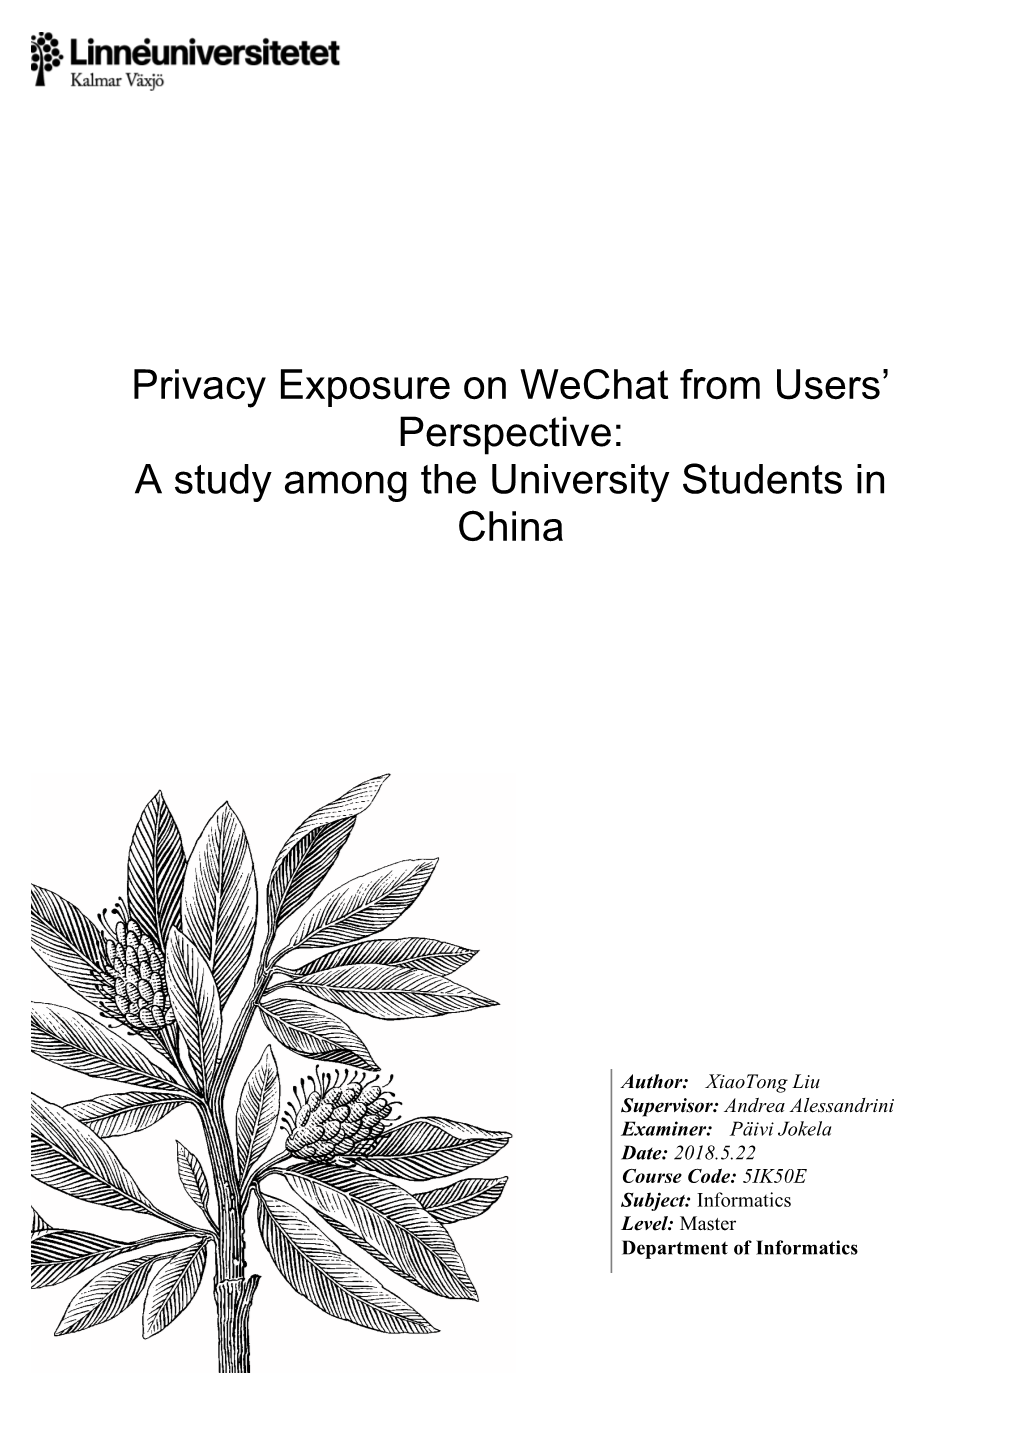 Privacy Exposure on Wechat from Users' Perspective: a Study Among the University Students in China